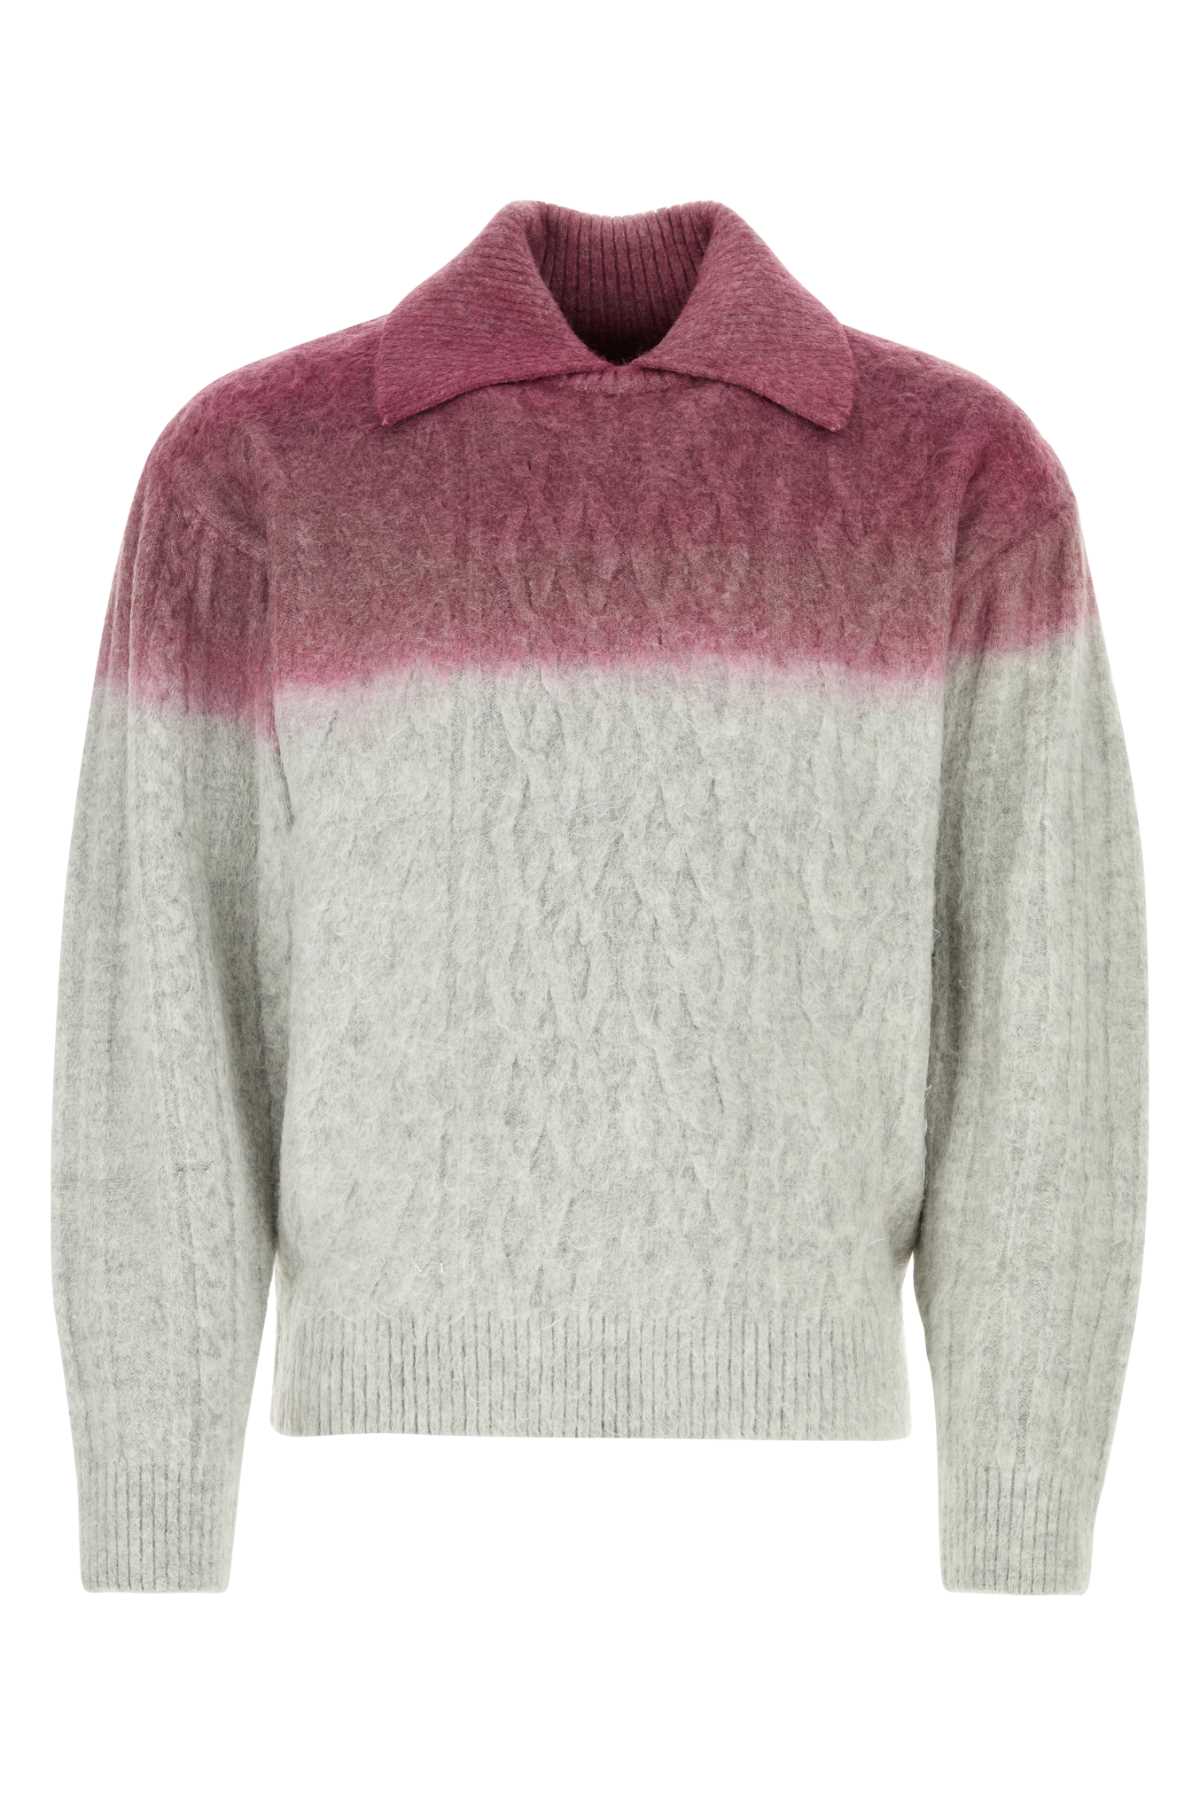 Two-tone Stretch Acrylic Blend Sweater